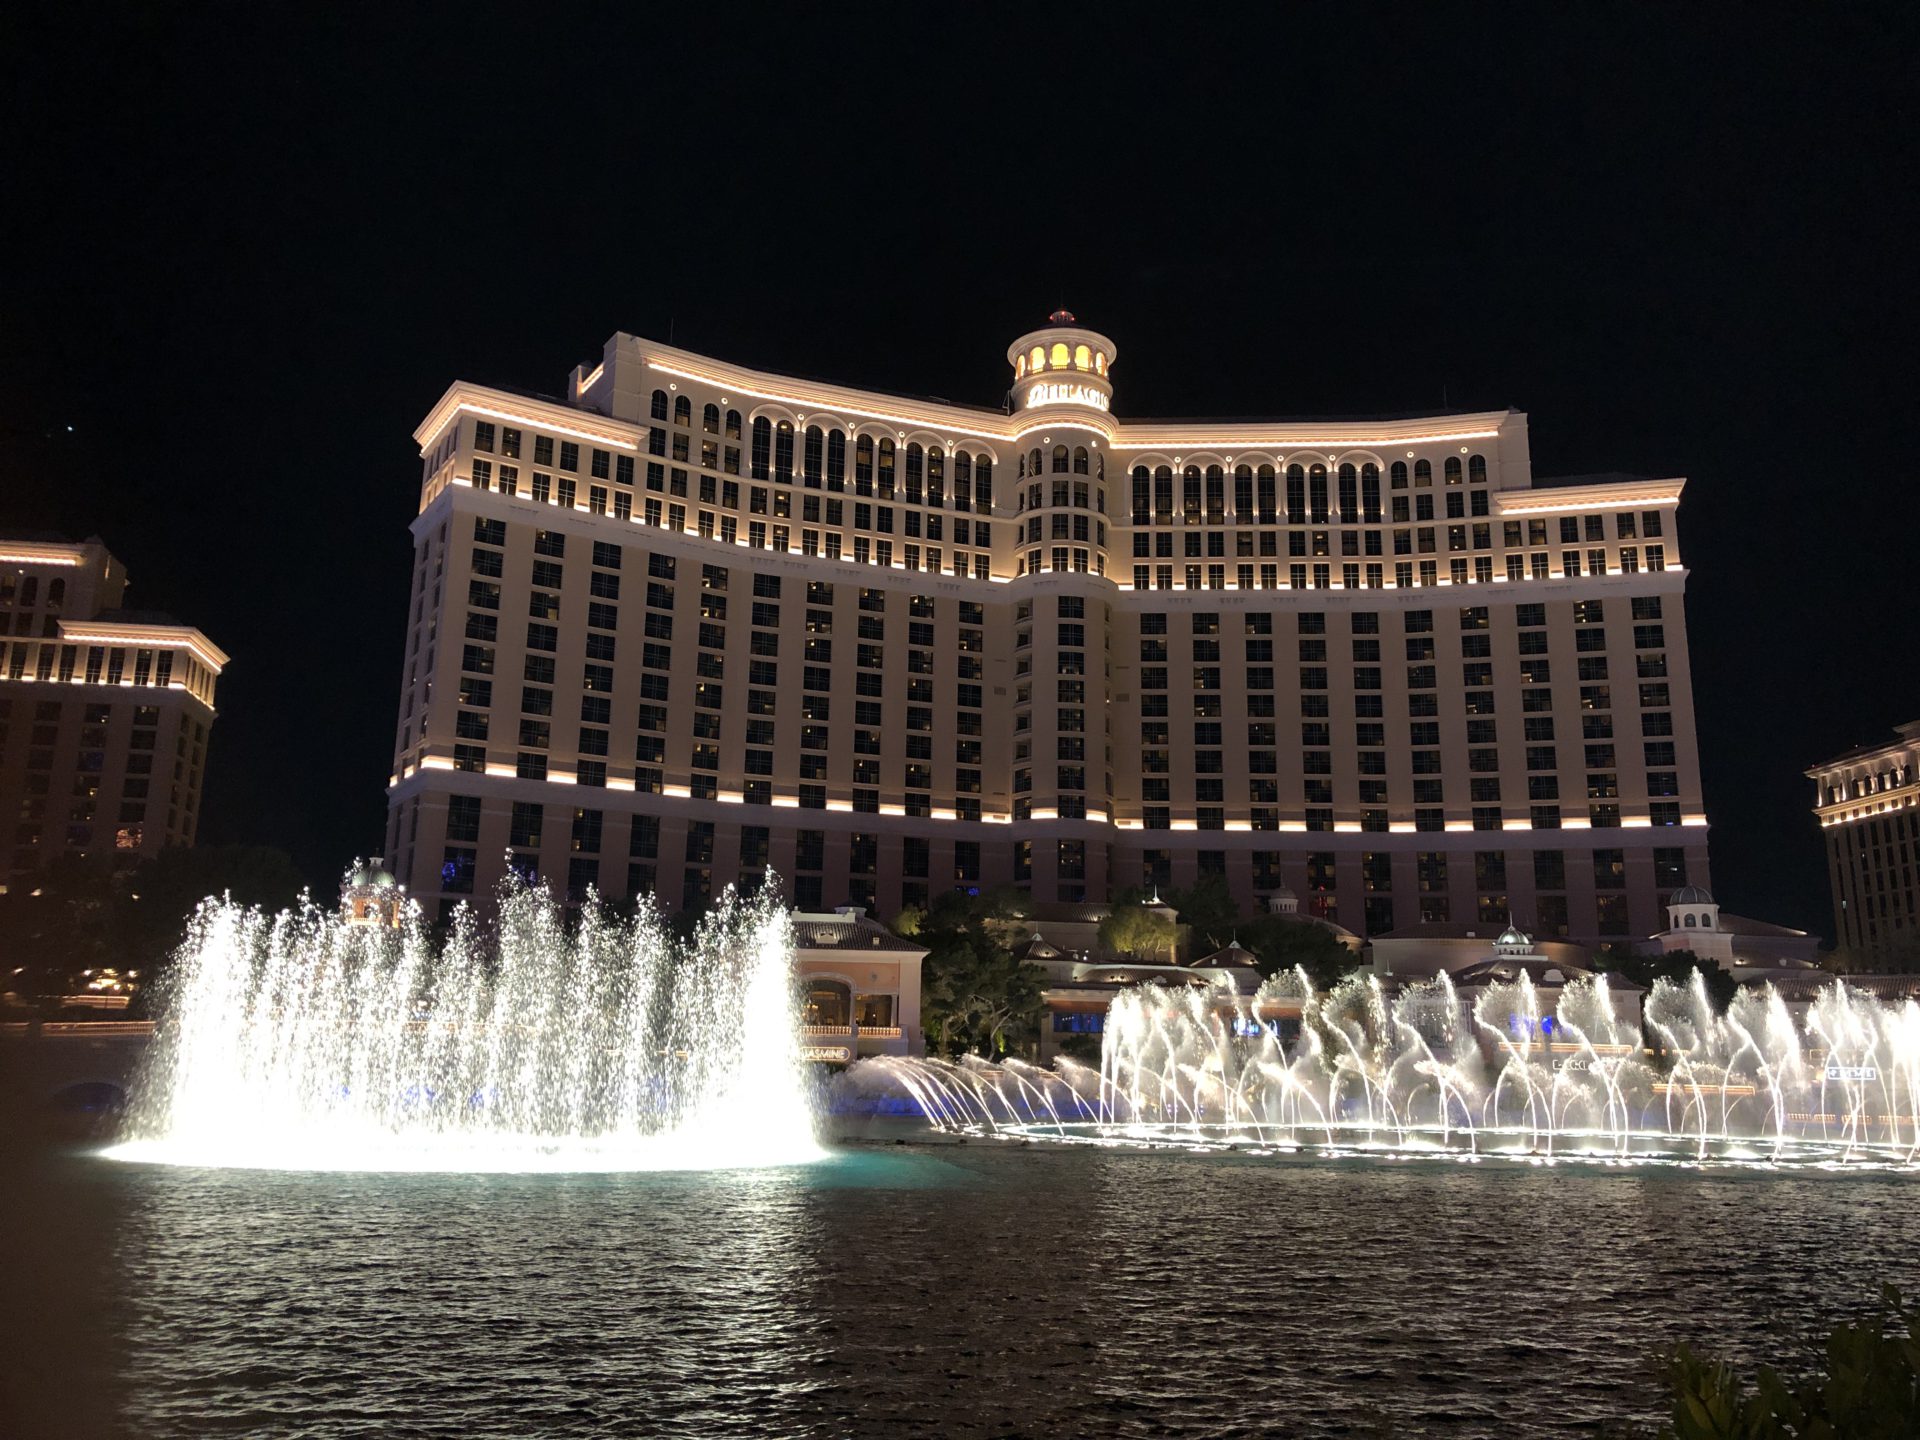 The Fountains of Bellagio at night present a display of illuminated water jets against the backdrop of a black Las Vegas skyline